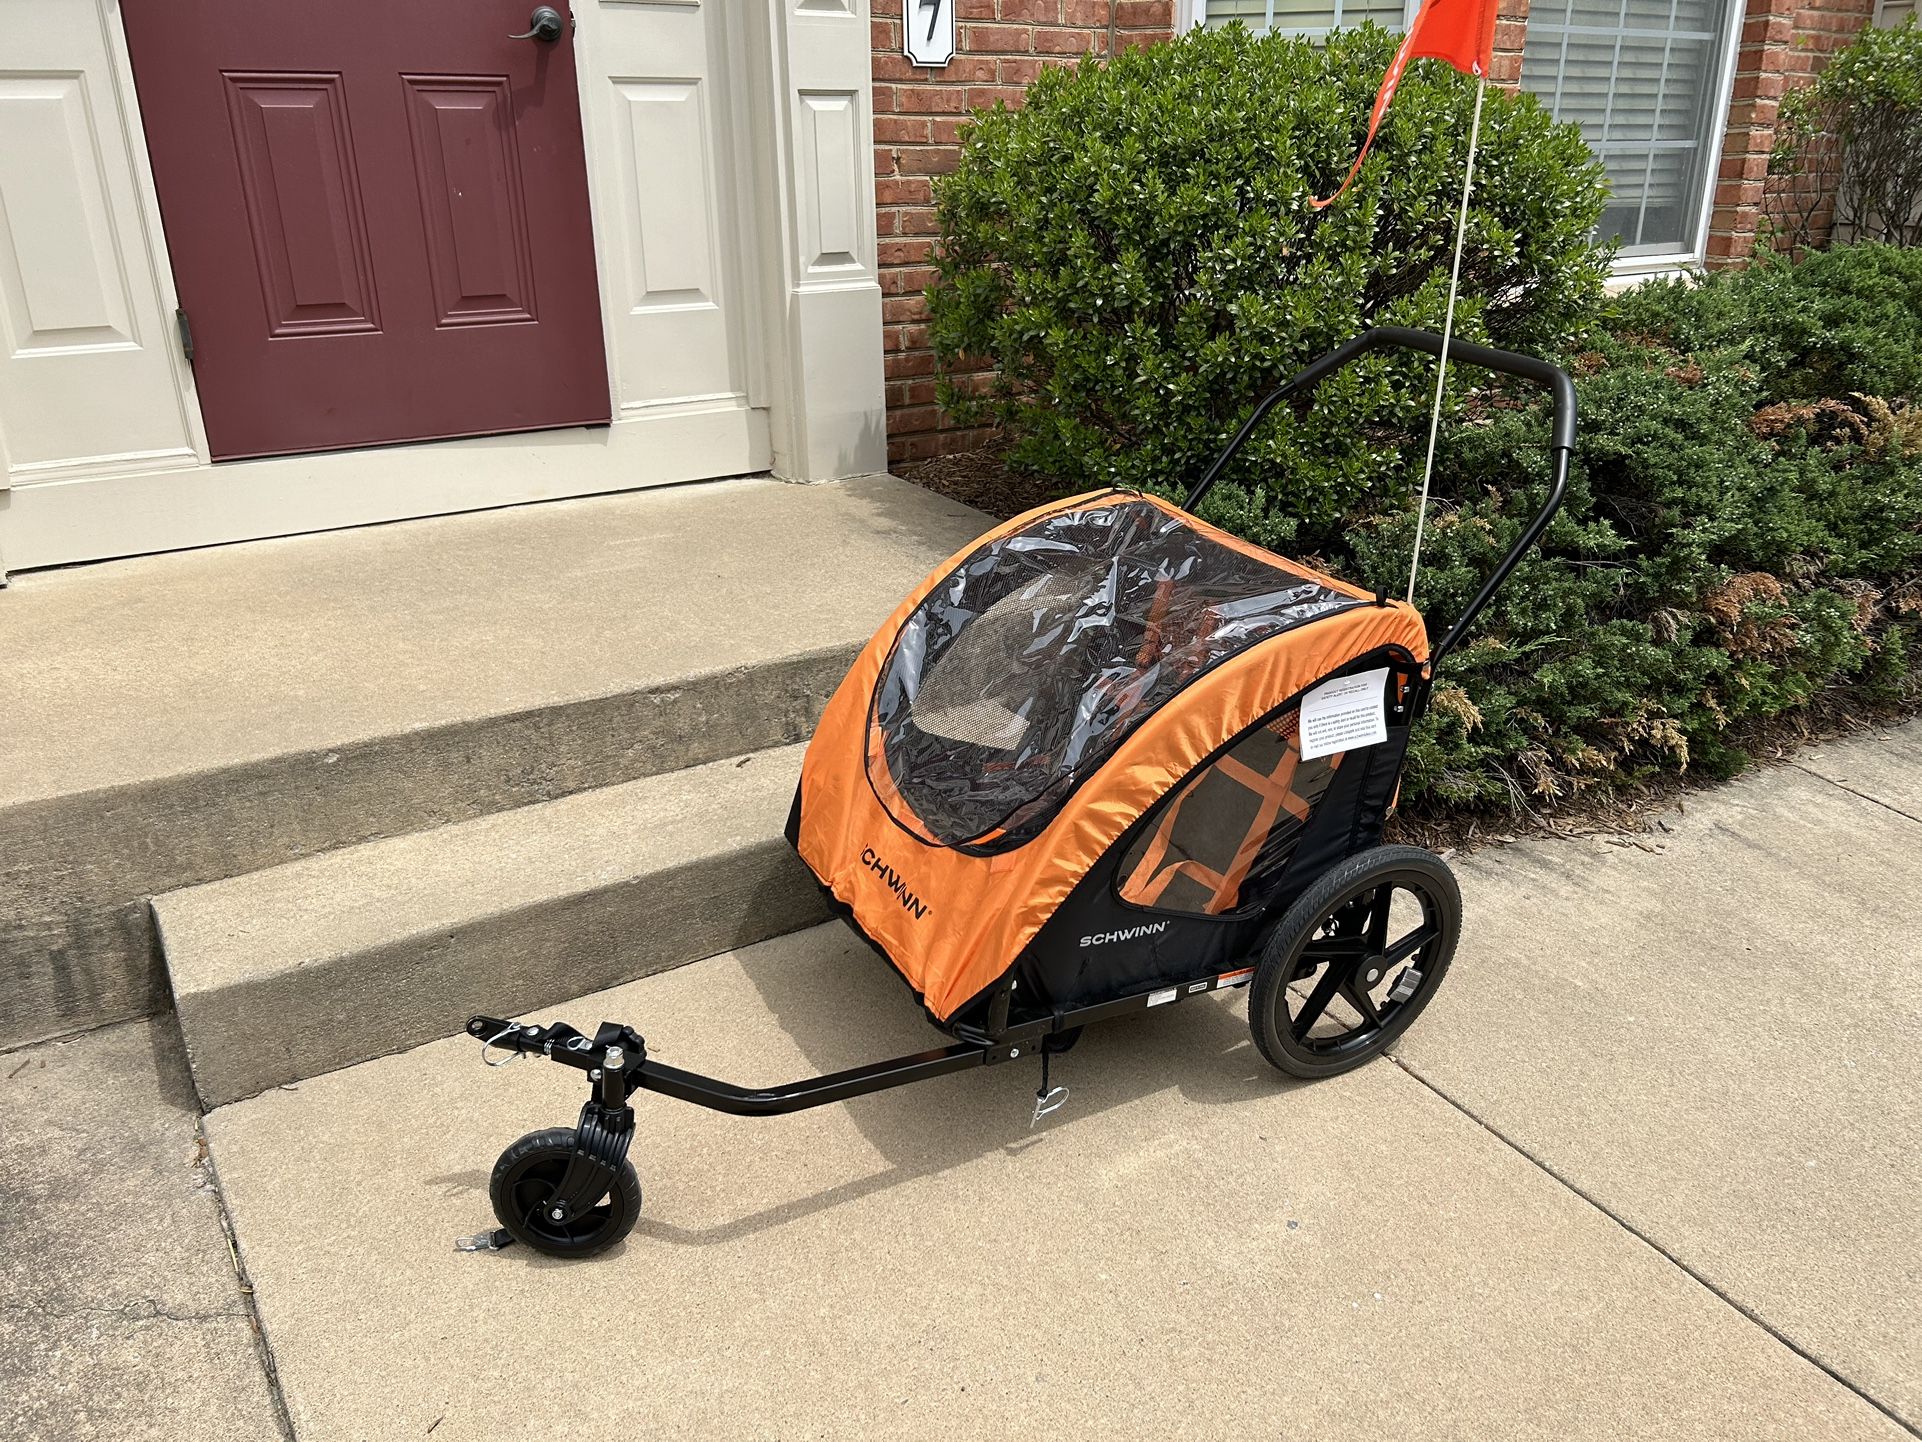 Schwinn Bicycle Trailer with Stroller Attachment (Two Seats) Brand New!